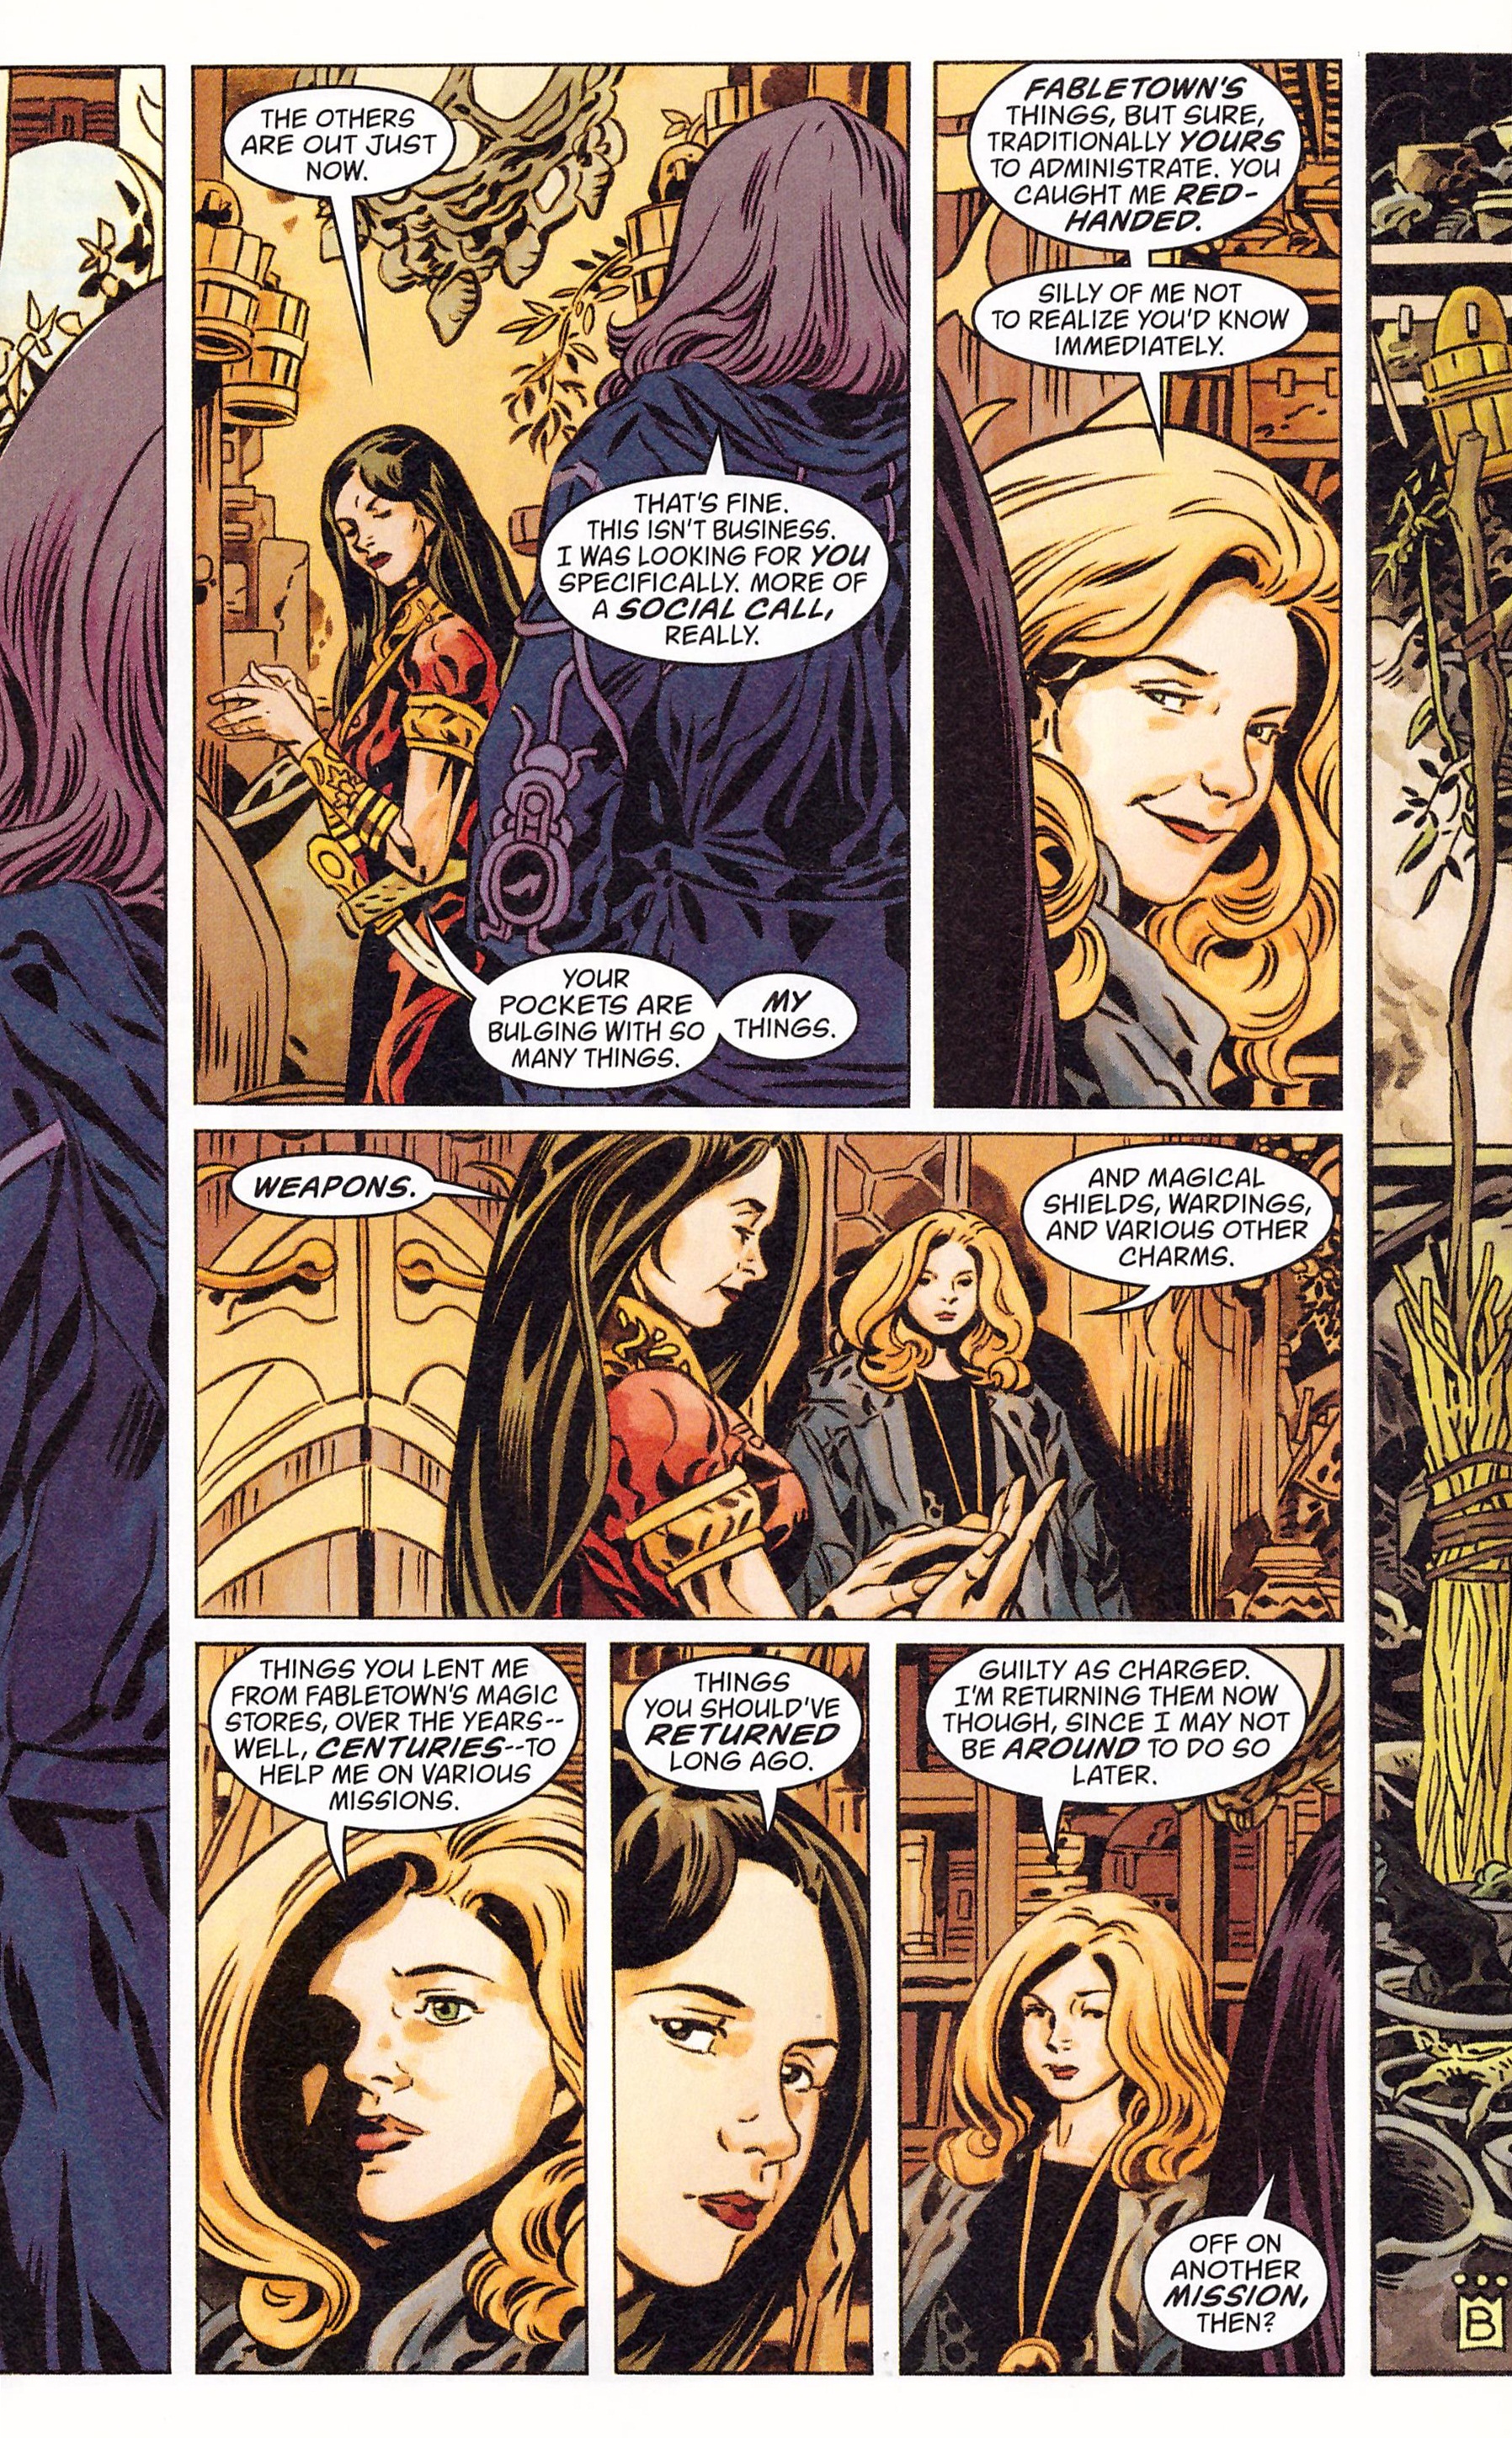 Fables The Deluxe Edition 15 review